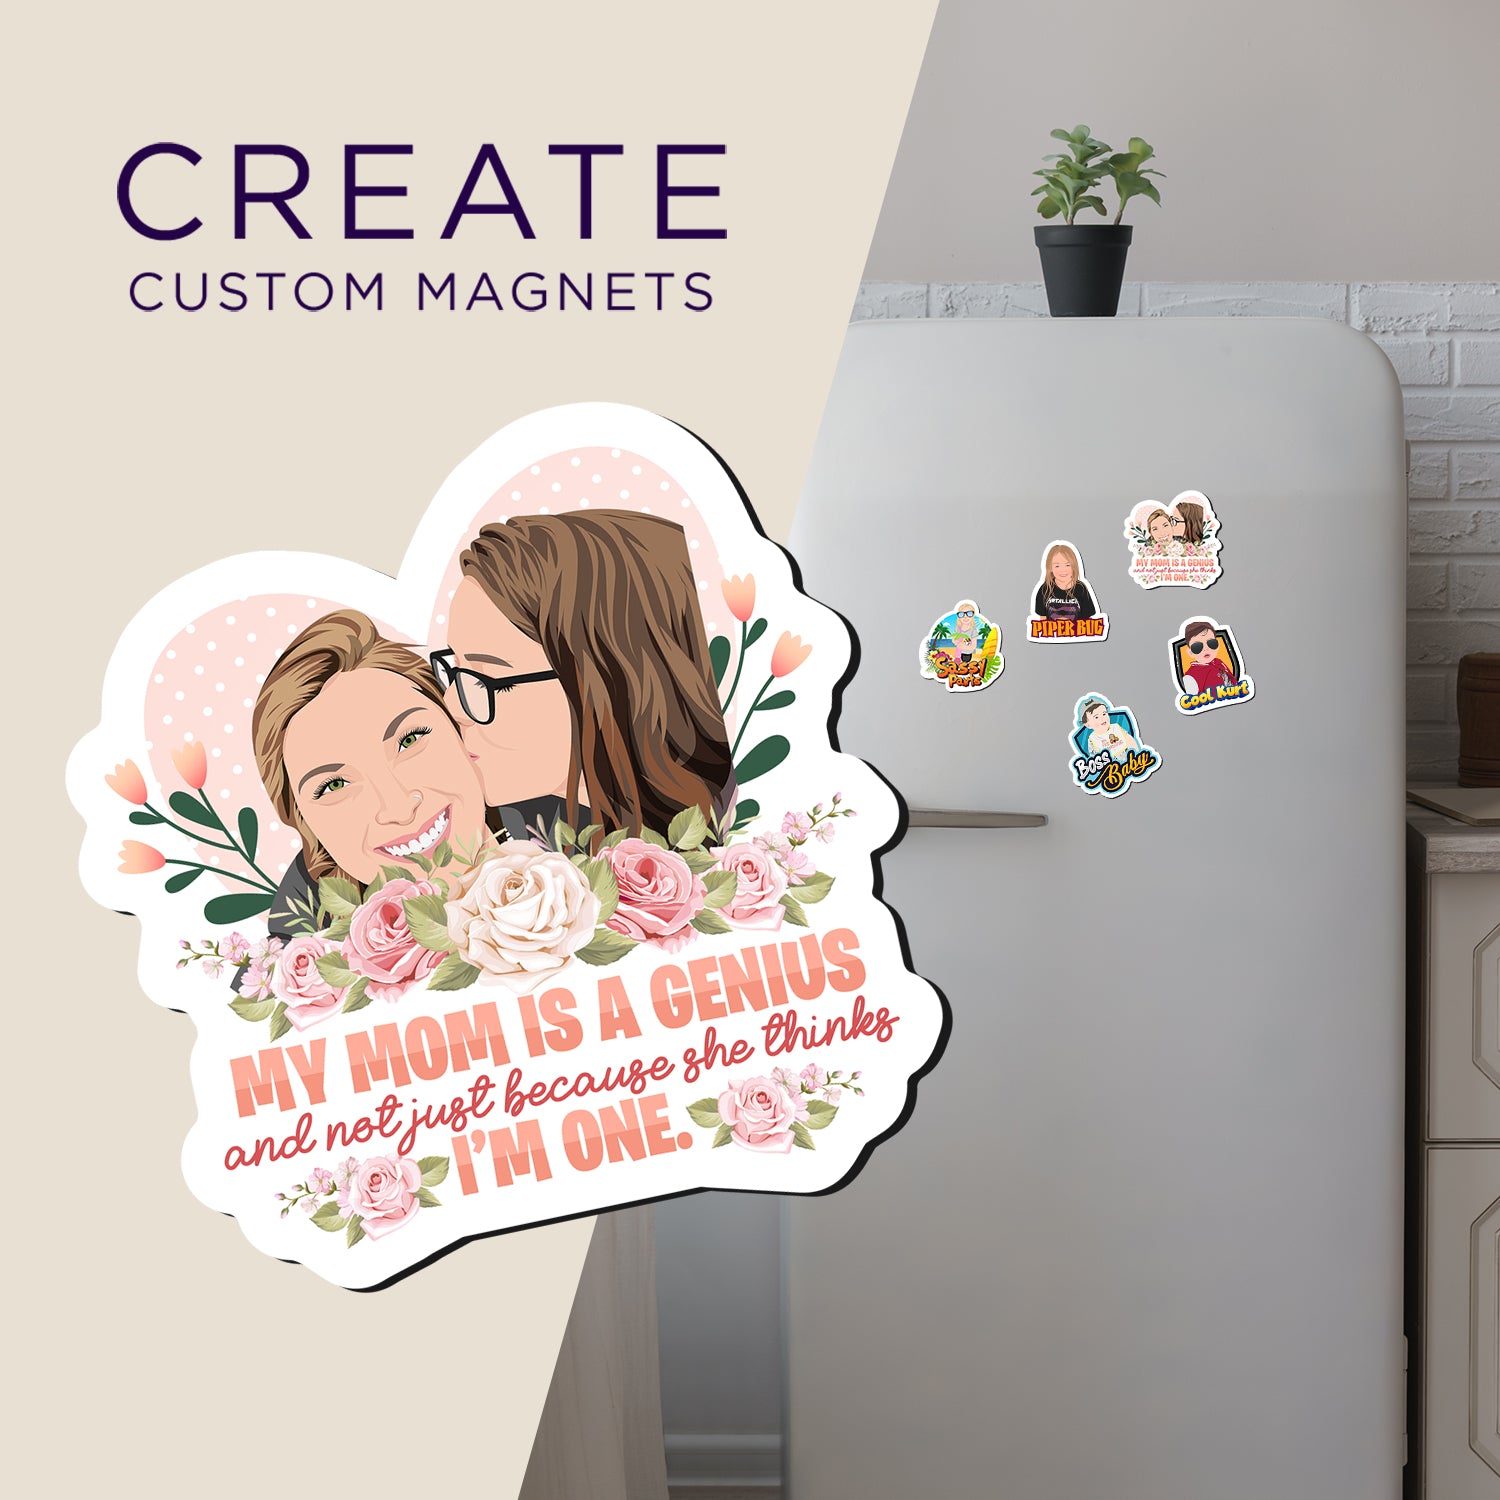 Custom Printed Magnets | Print Your Own Magnets